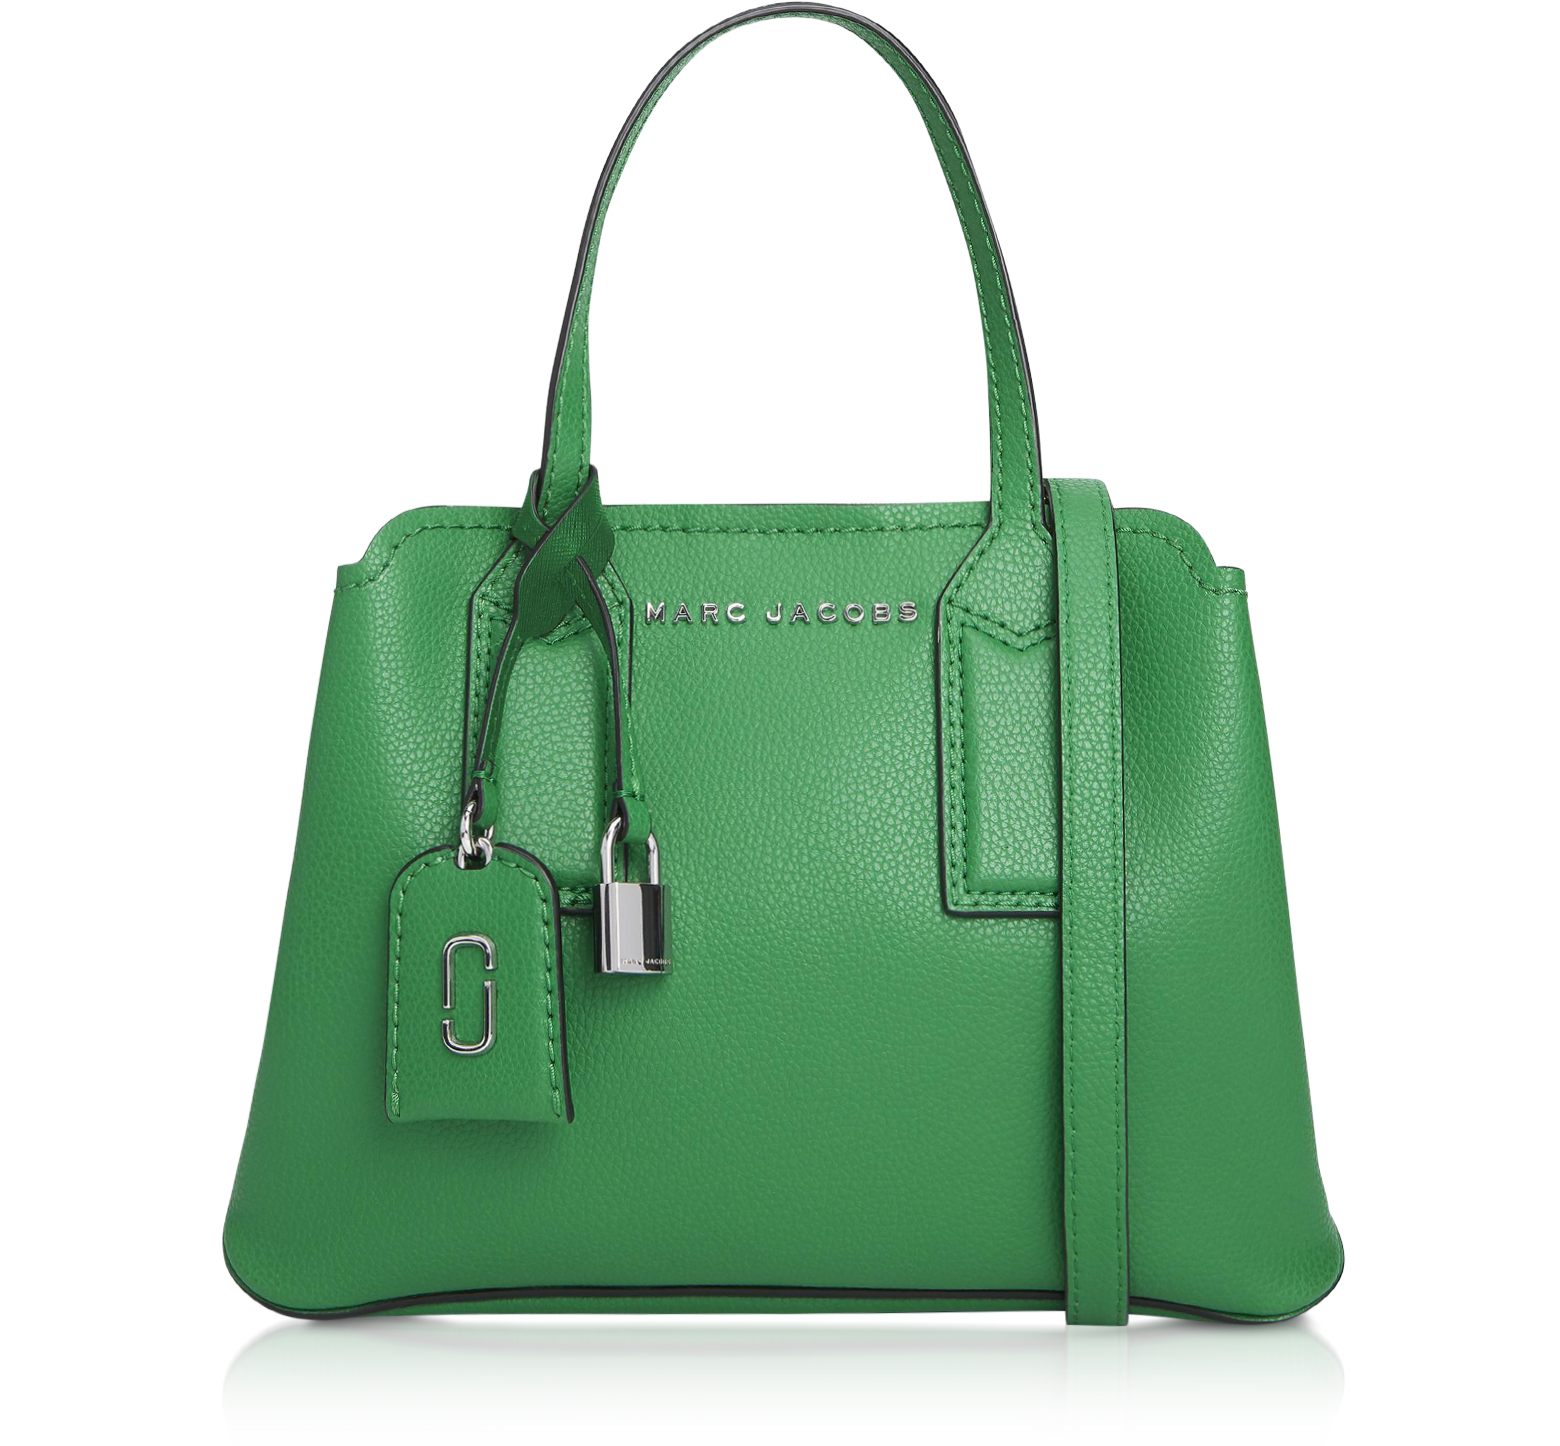 Marc Jacobs Green The Editor 29 Leather Crossbody Bag at FORZIERI